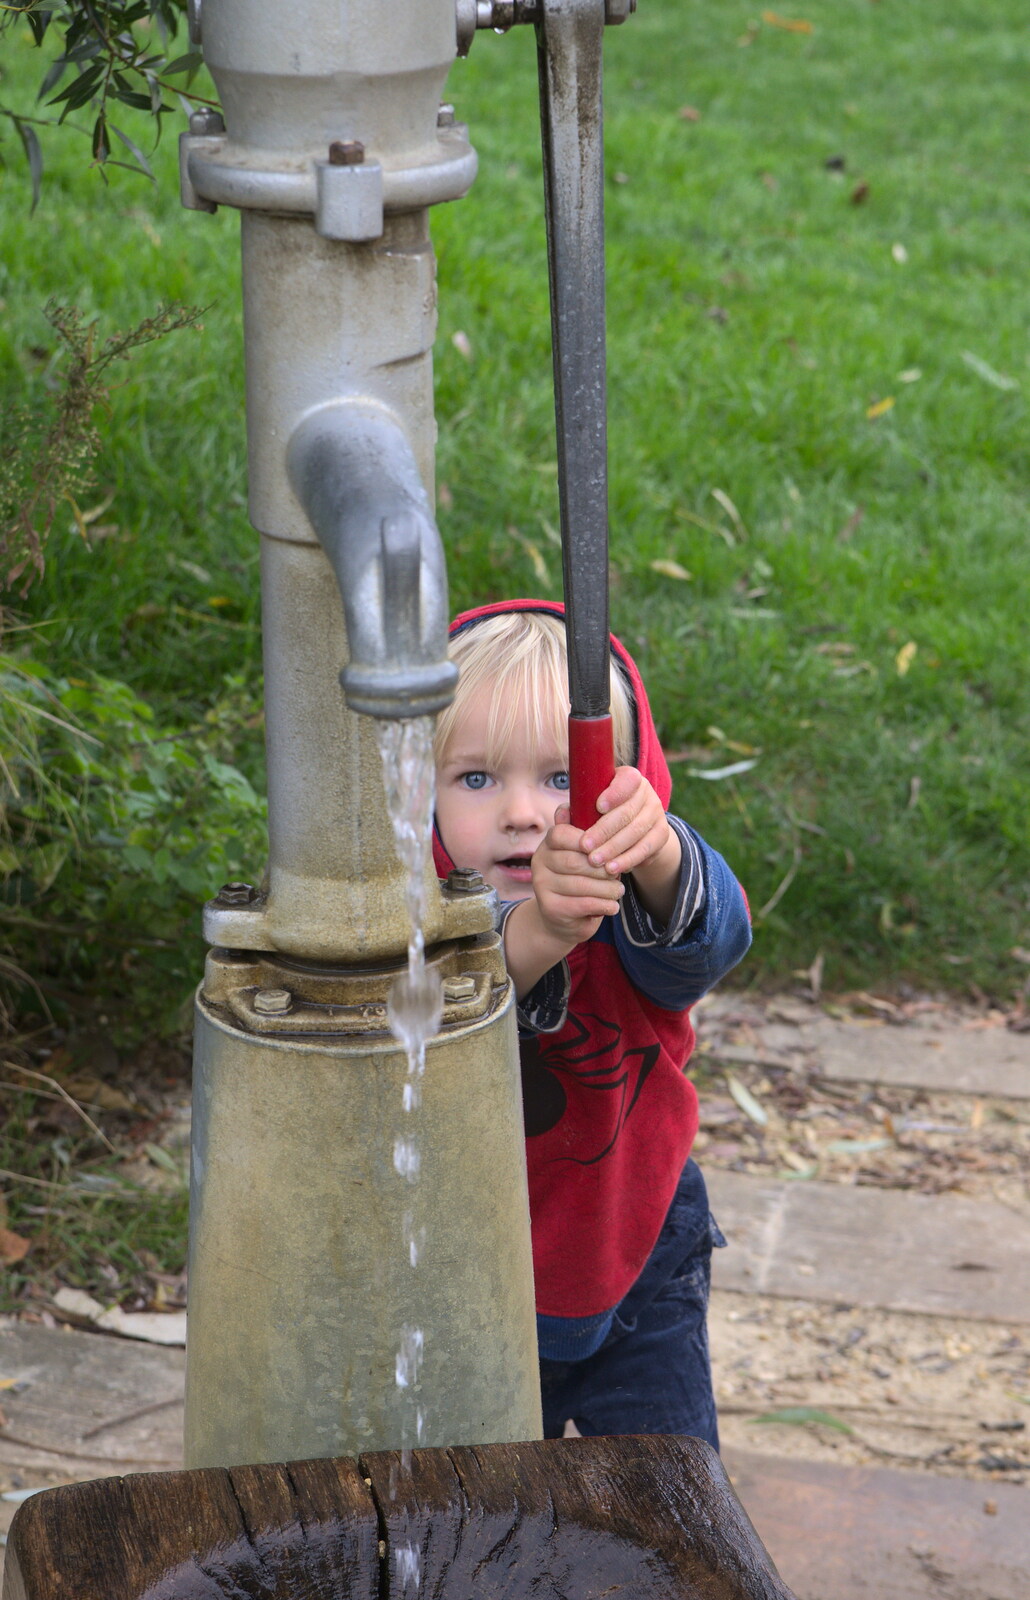 Harry does more pumping action from A Trip to Abbey Gardens, Bury St. Edmunds, Suffolk - 29th October 2014